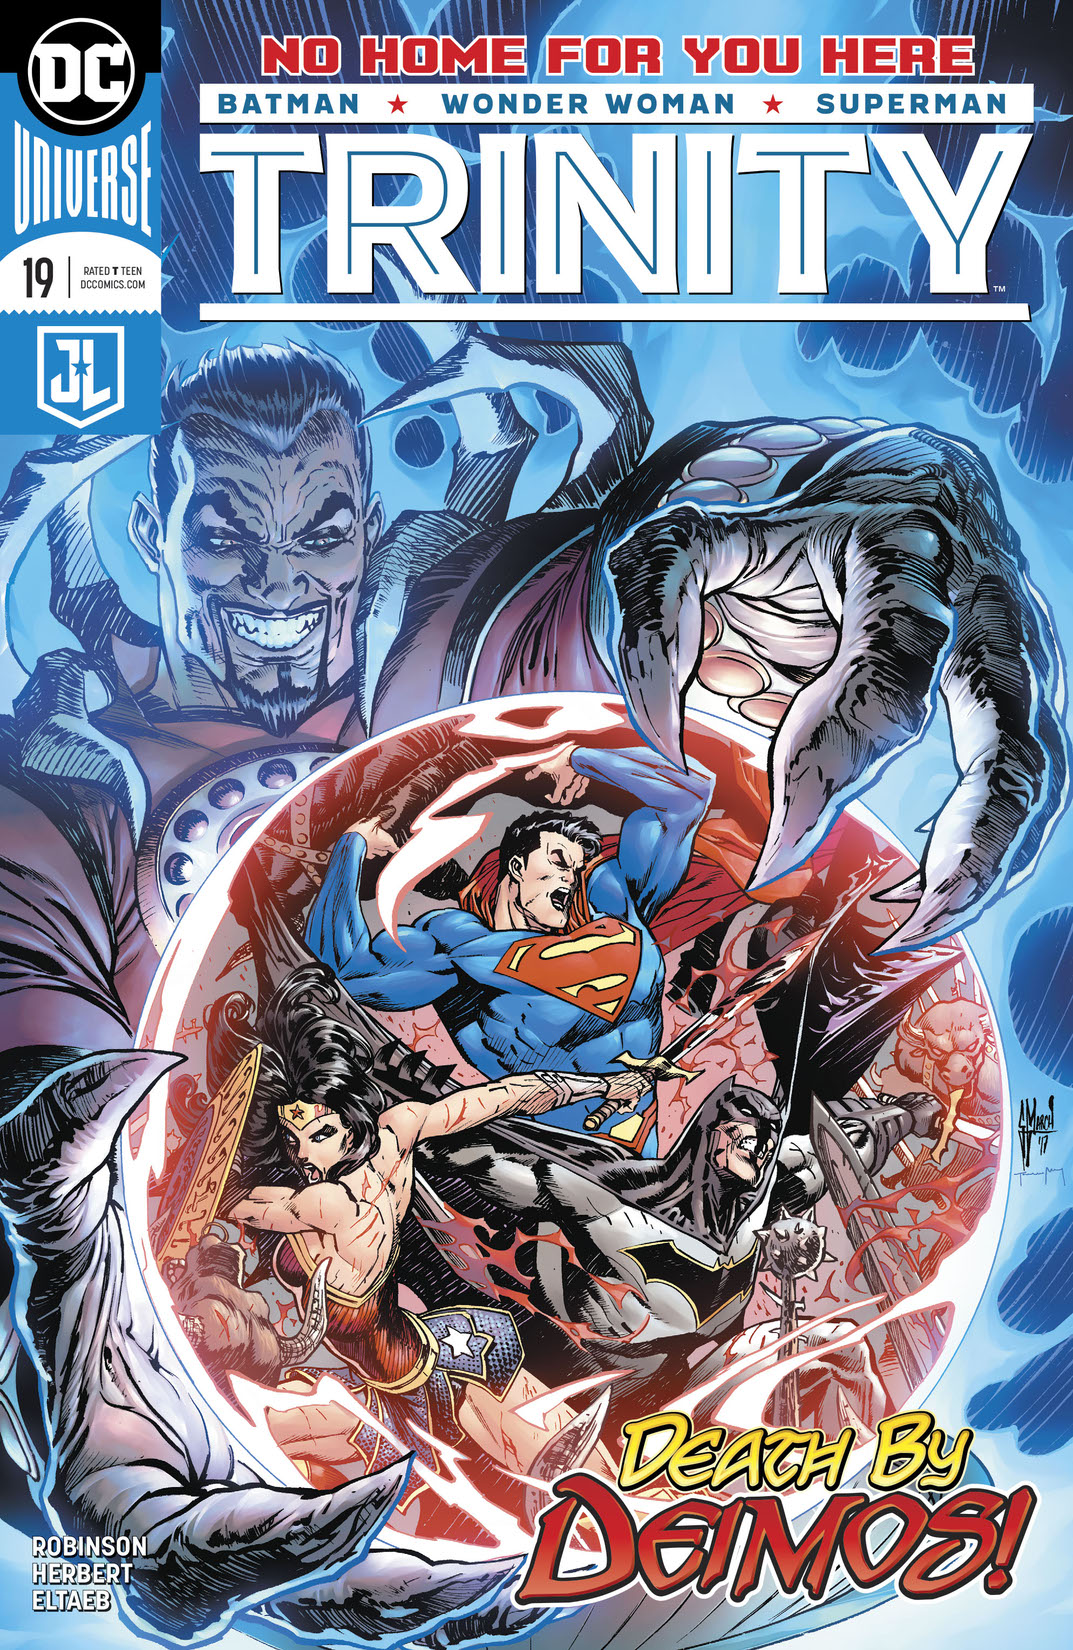 Trinity (2016-2018) #19 preview images